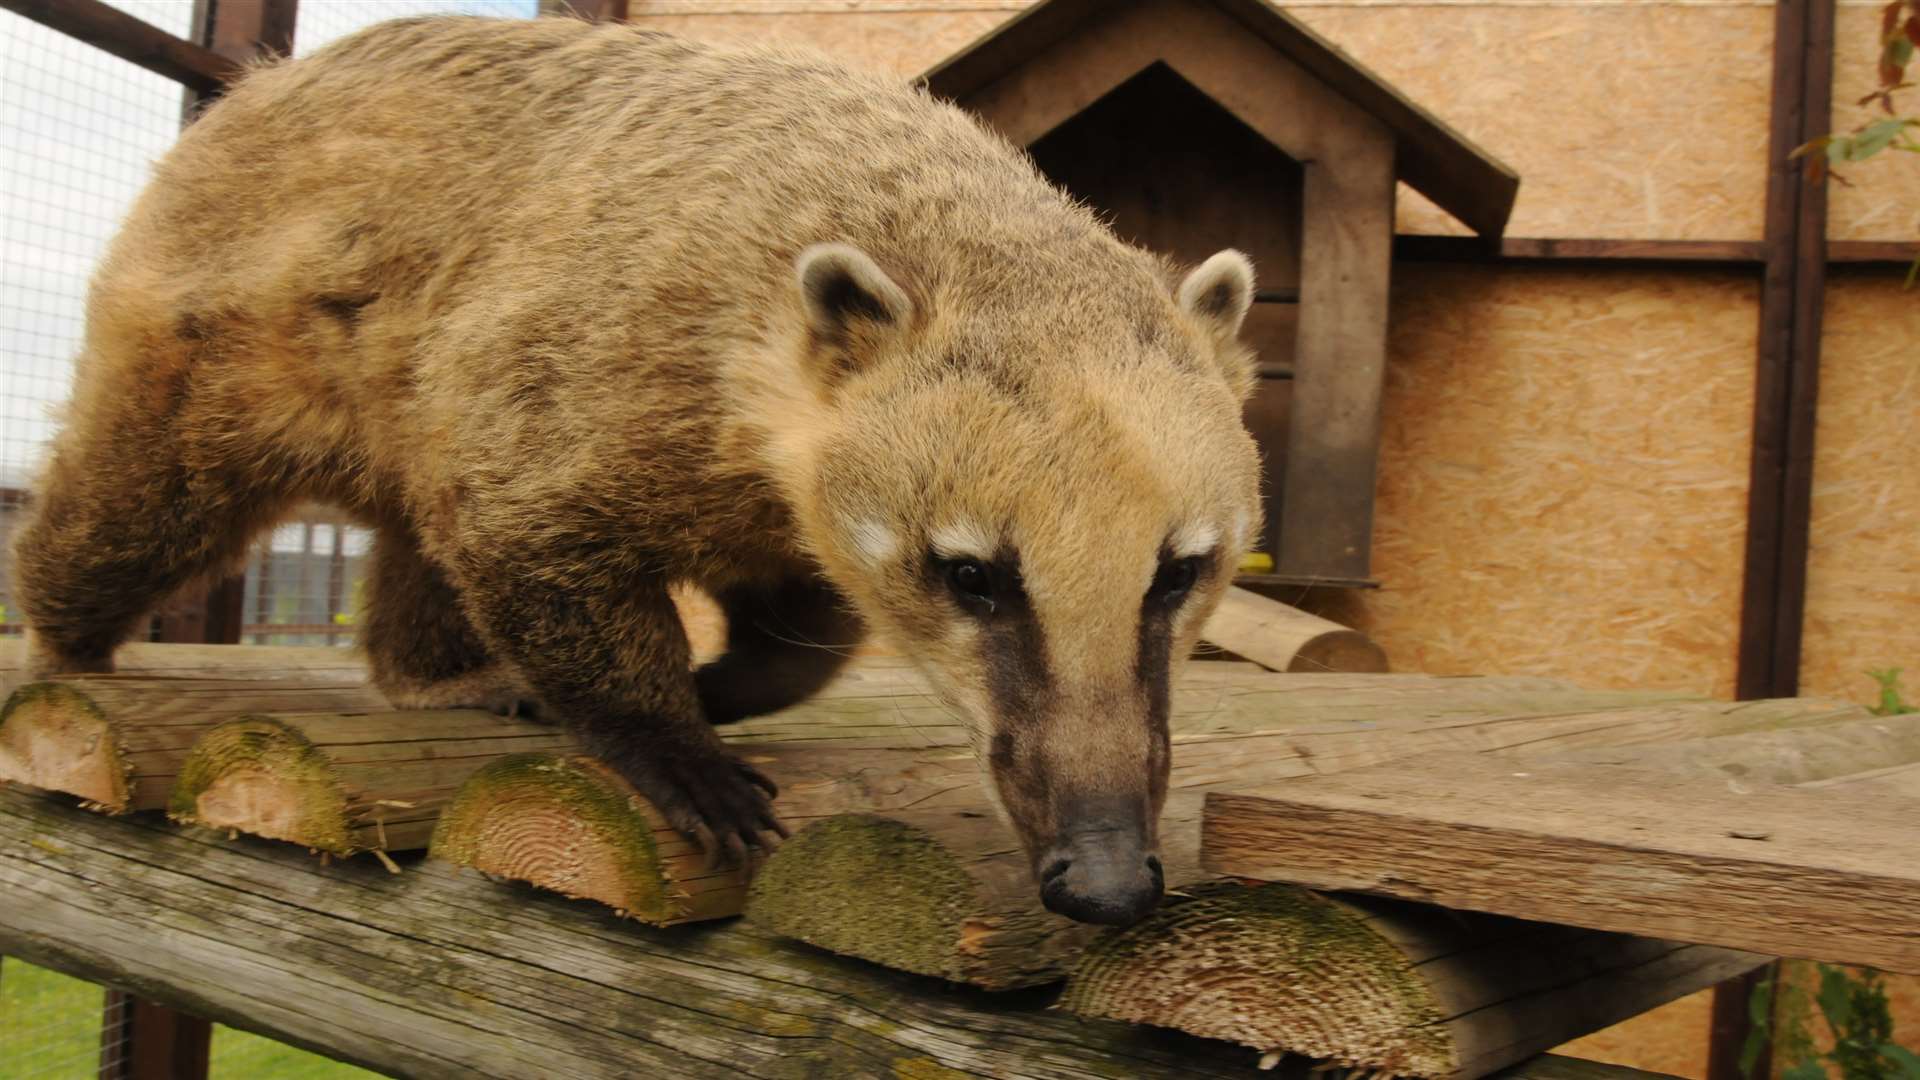 Basil the coati's cage will have to be boarded up during the summer. Picture: Steve Crispe.